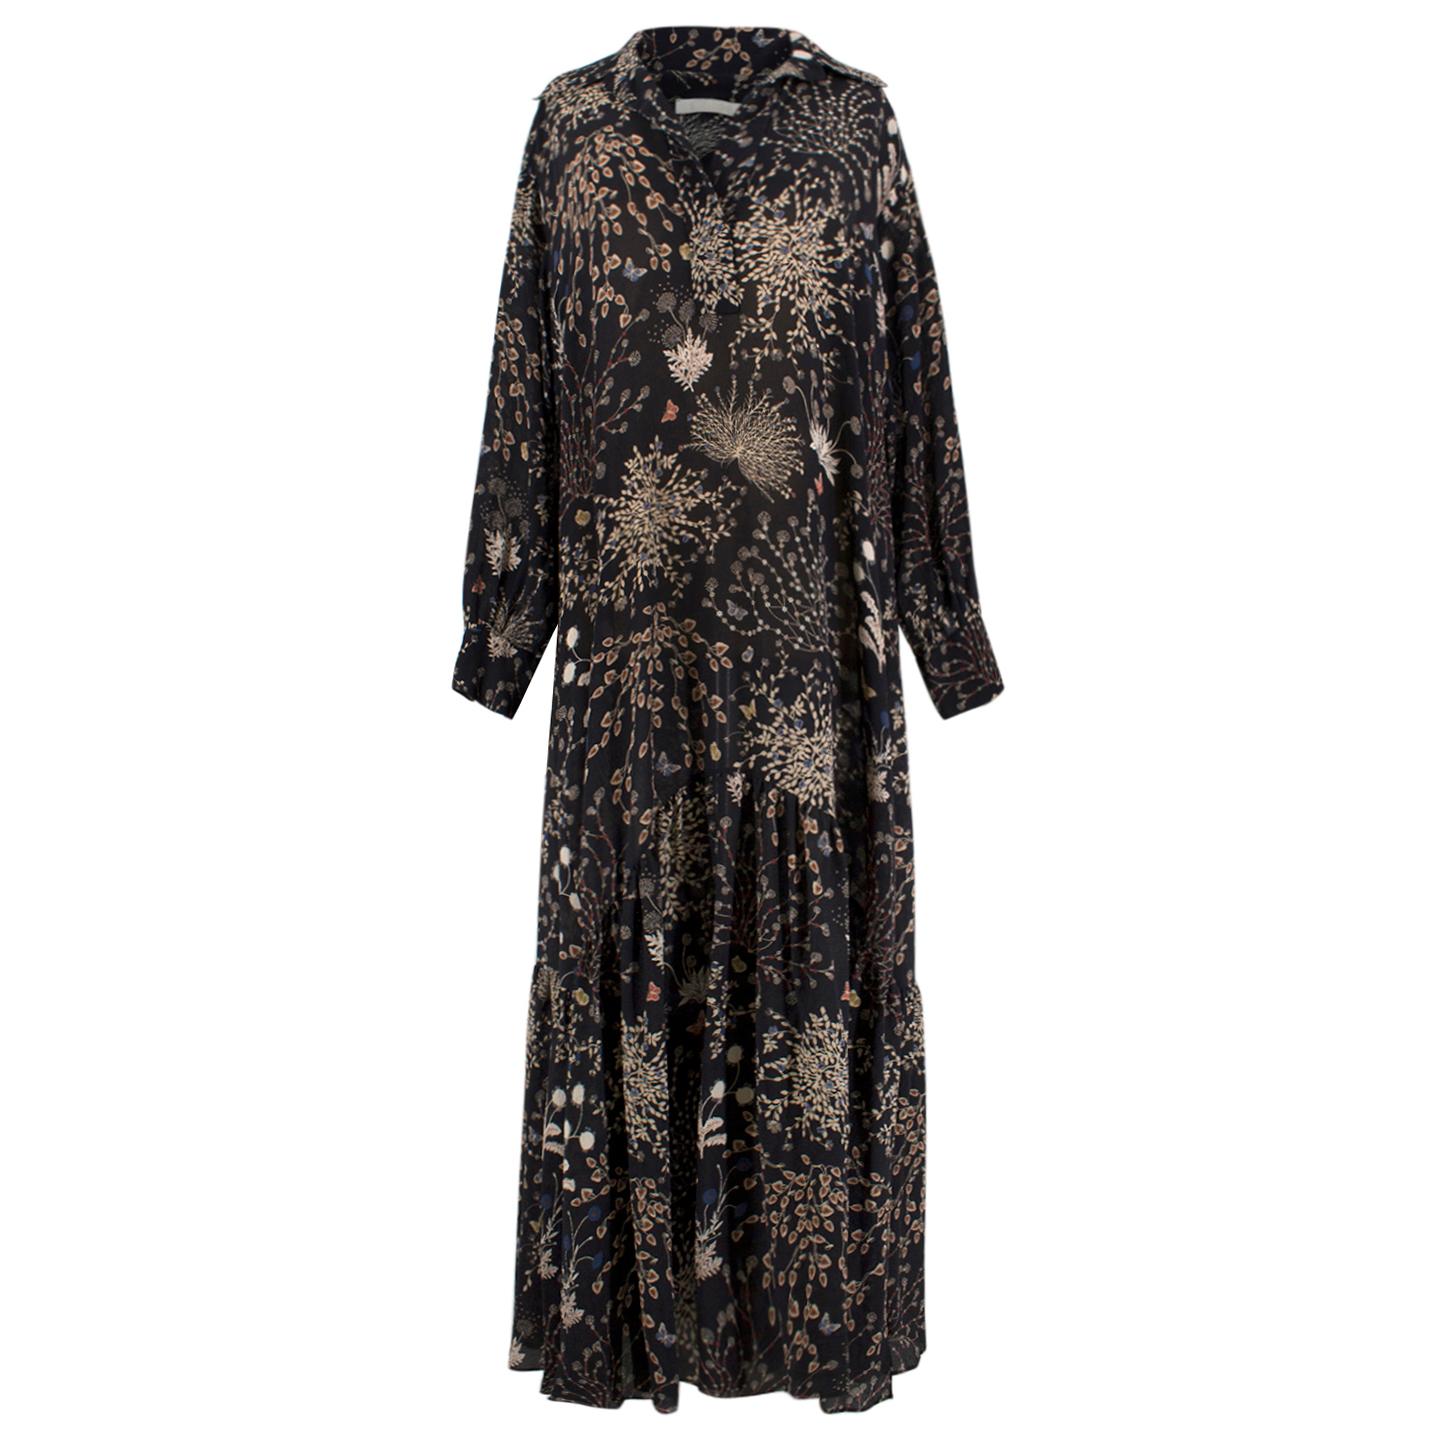 Chloe Silk Floral Maxi Dress

- Black in colour with muted floral print all-over
- Collared
- Drop waist
- Open collar
- Long sleeves with fabric-coated buttoned cuffs
- Maxi-length

Please note, these items are pre-owned and may show some signs of